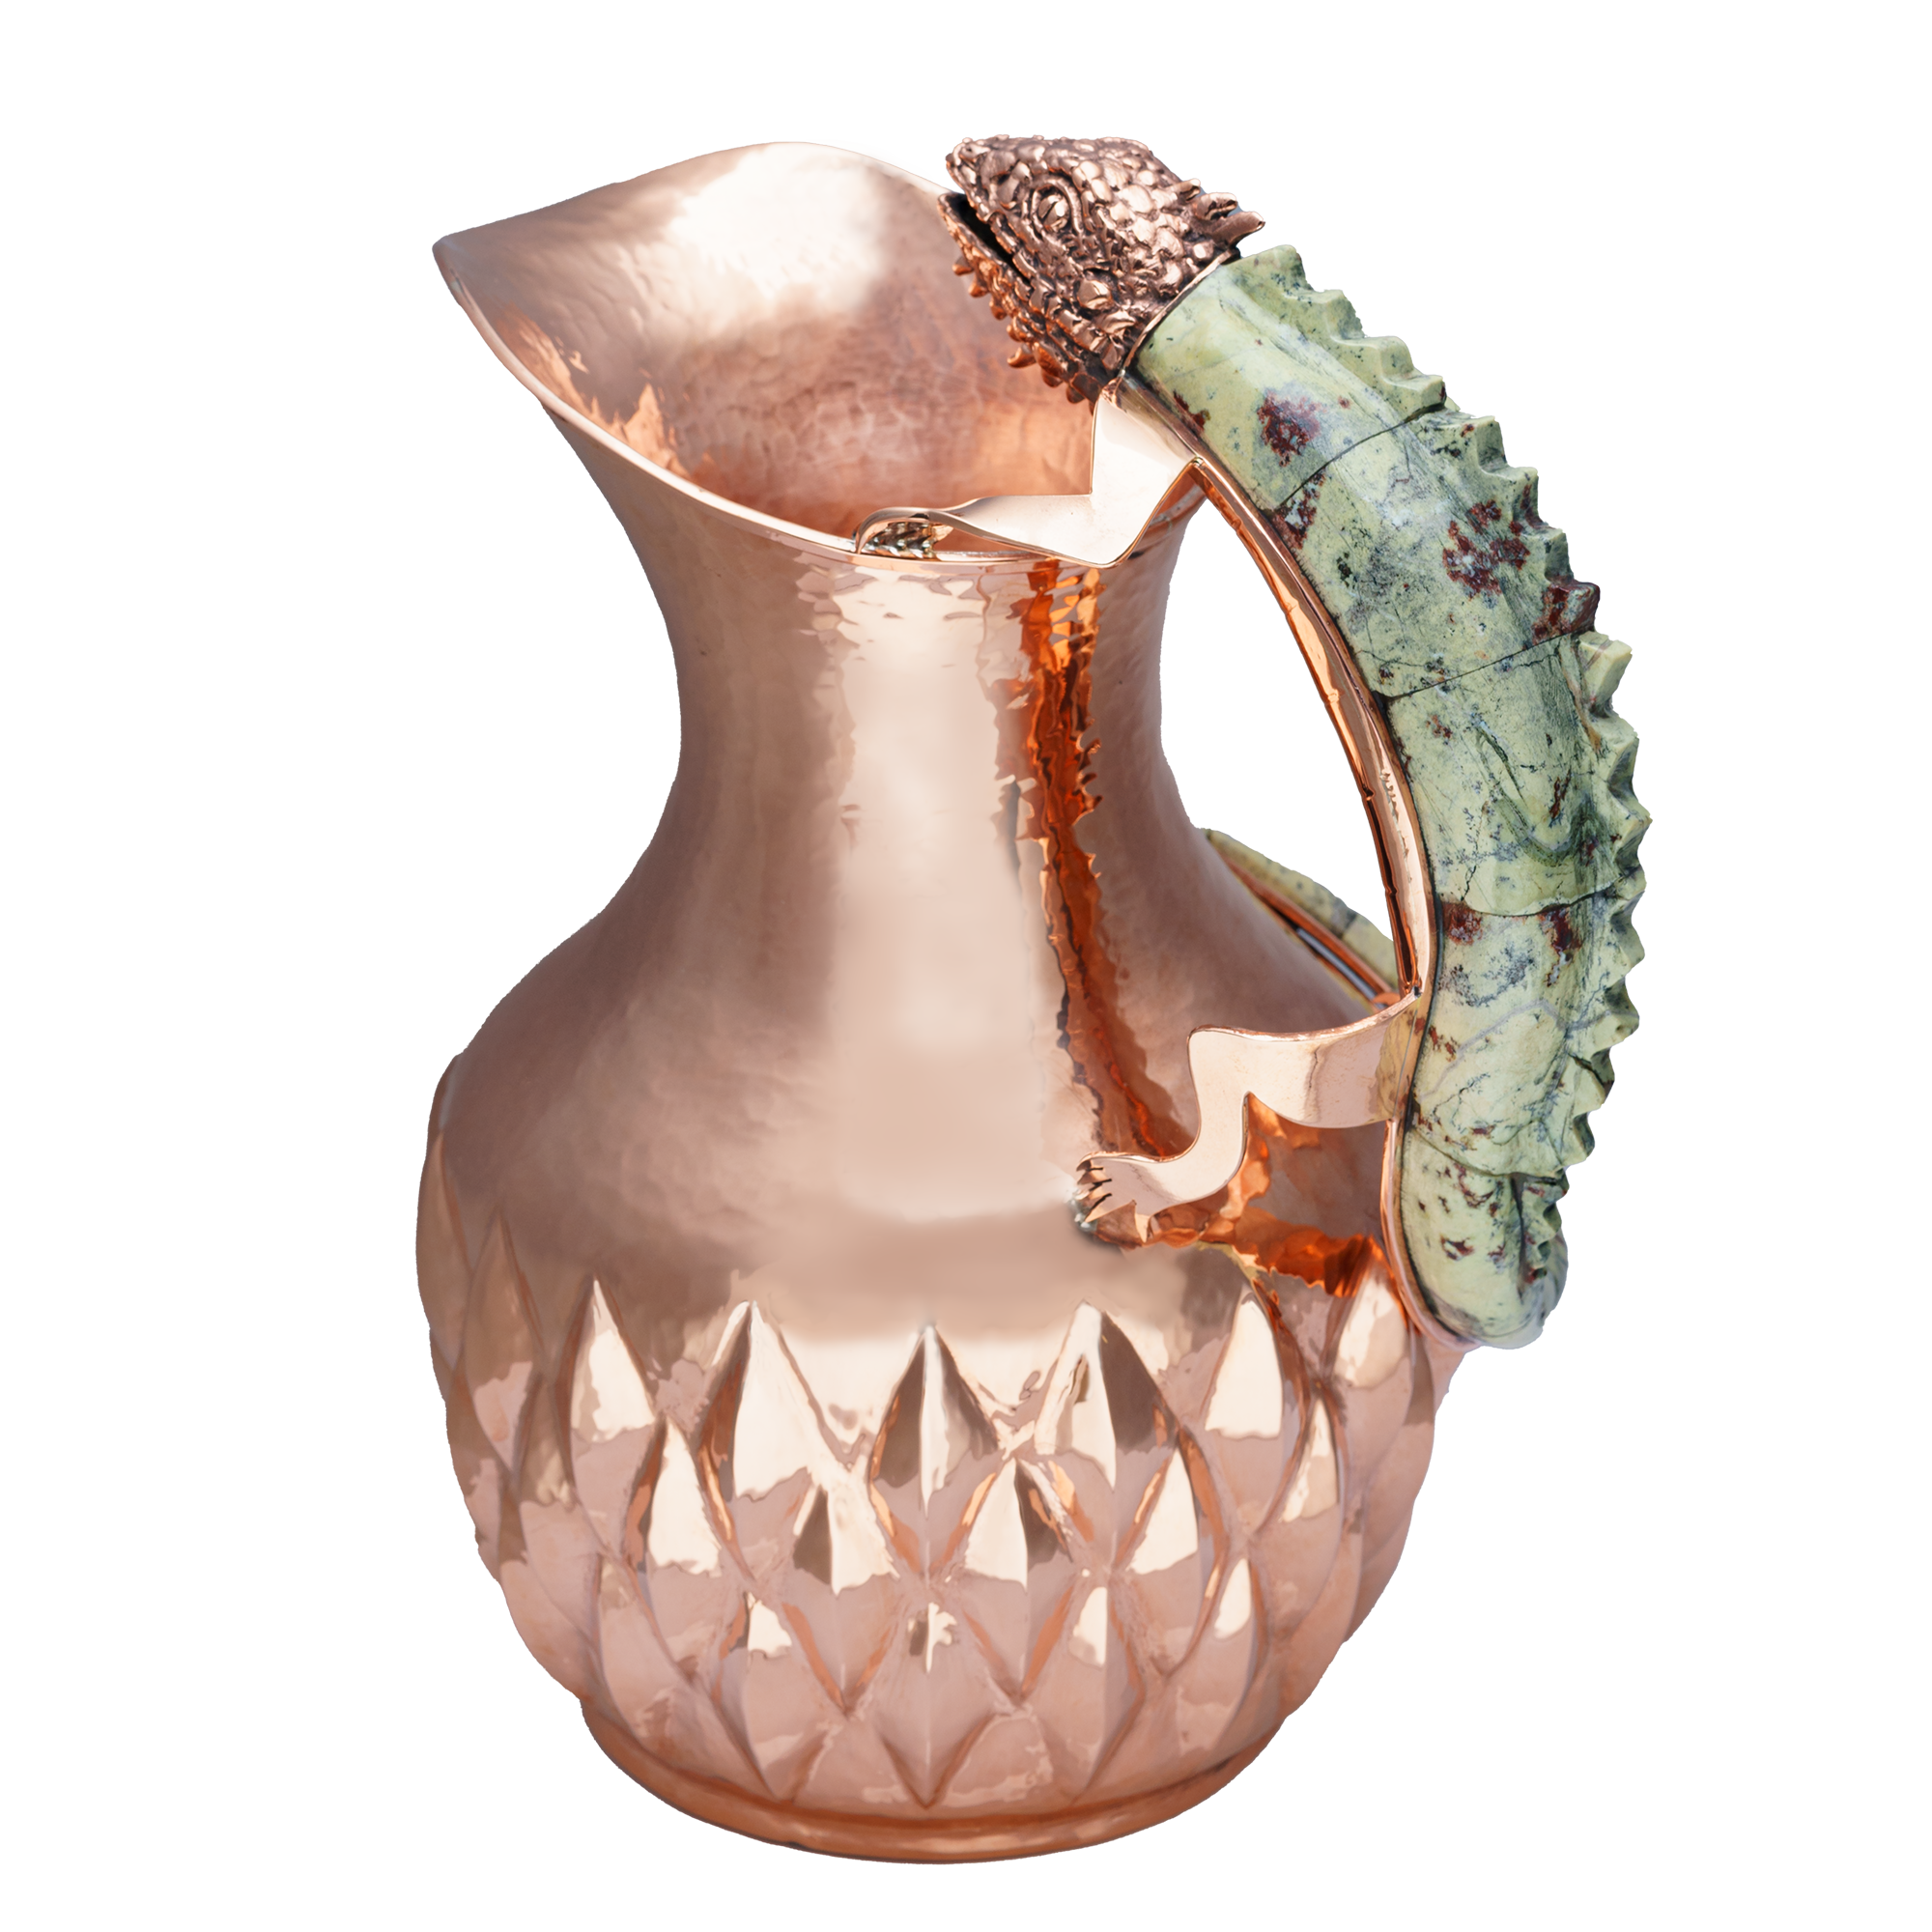 SU.ANG.4032 - LG. Copper Pitcher w/ Stone Iguana Handle, Wide Mouth